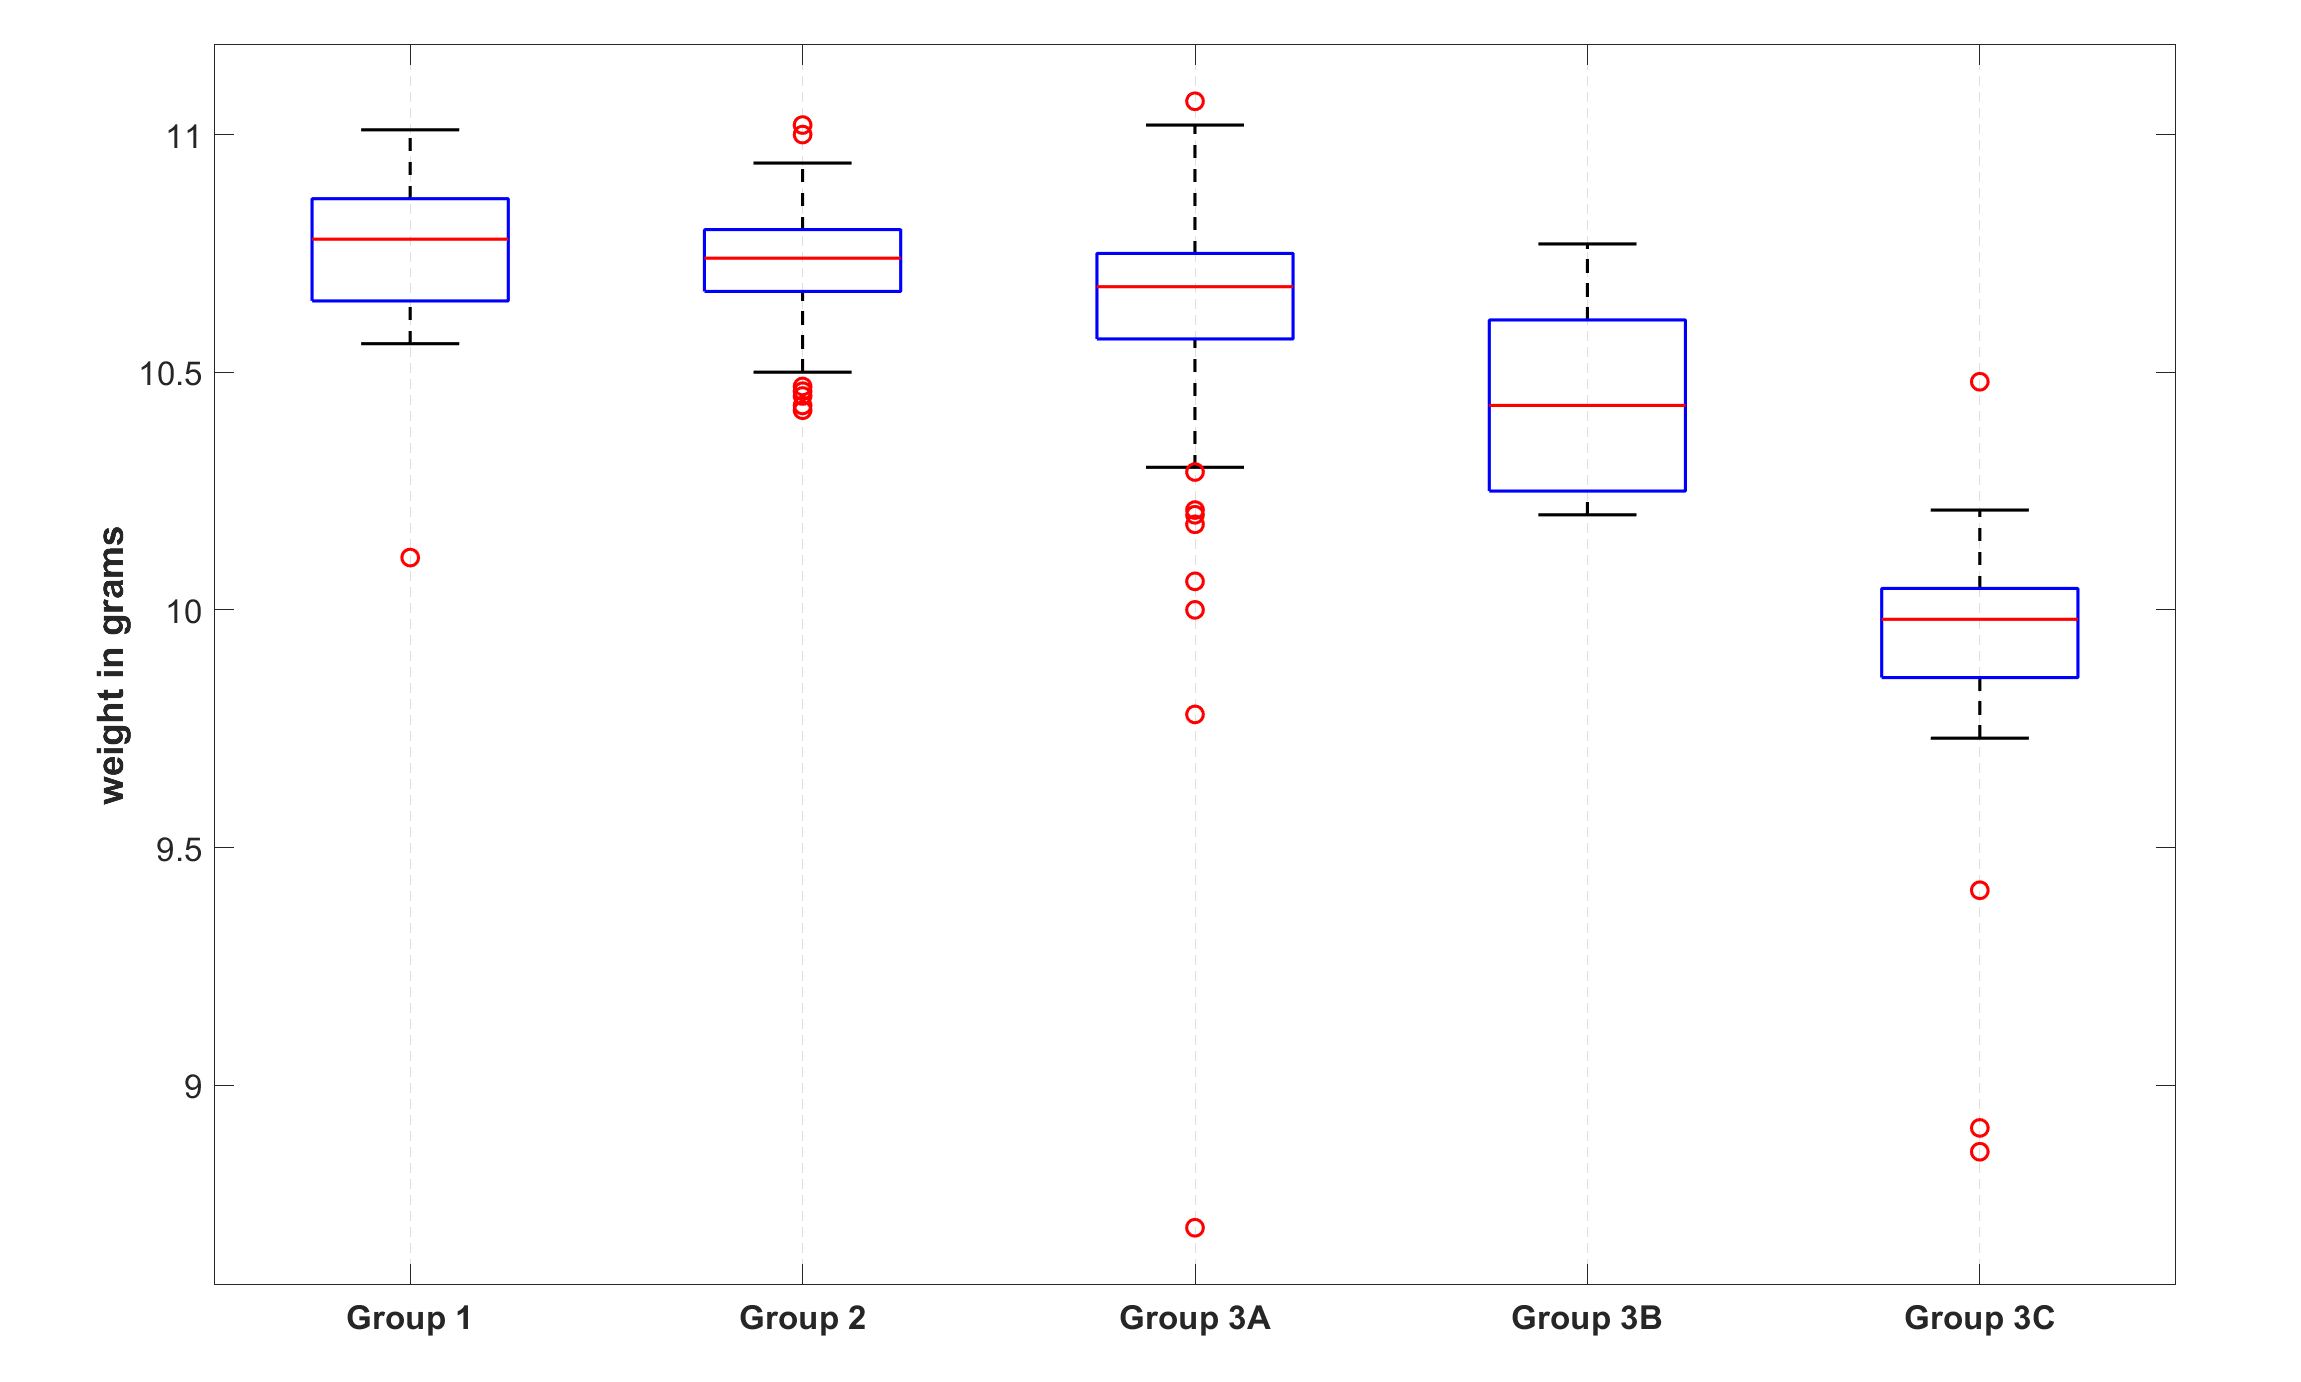 Figure 2: Box plots of coin groups